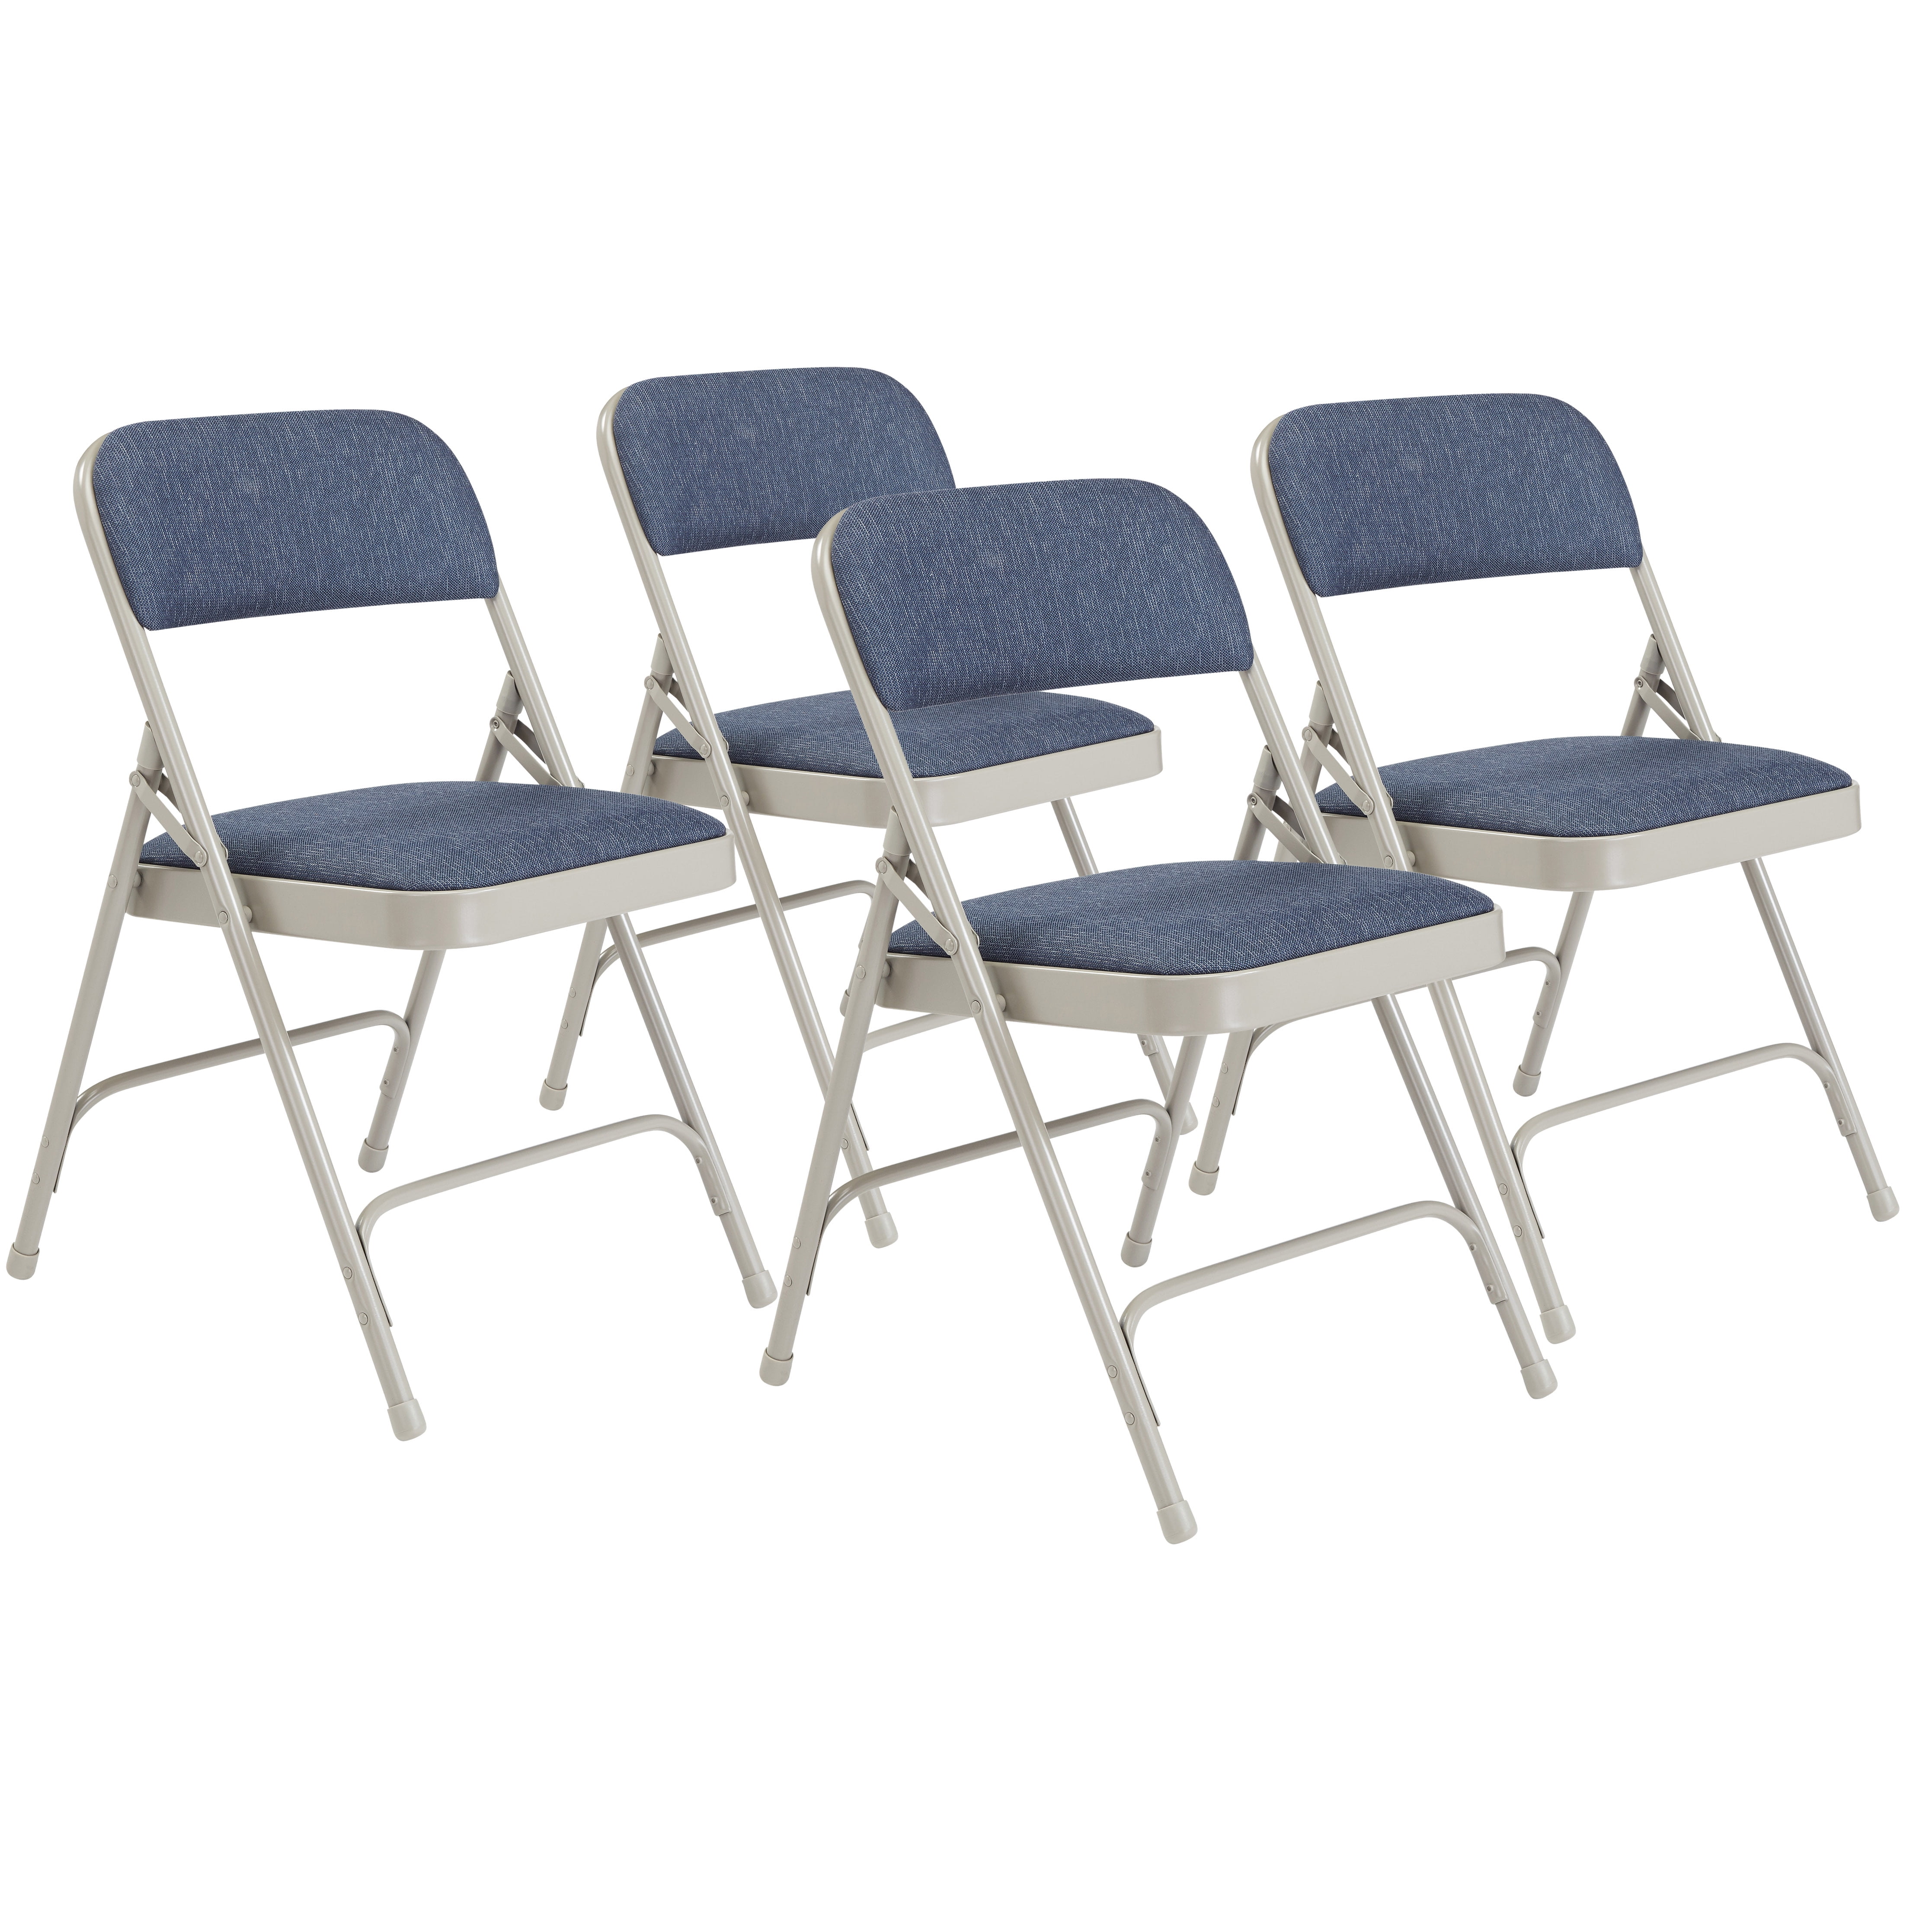  Realspace® Upholstered Padded Folding Chair, Gray : Home &  Kitchen